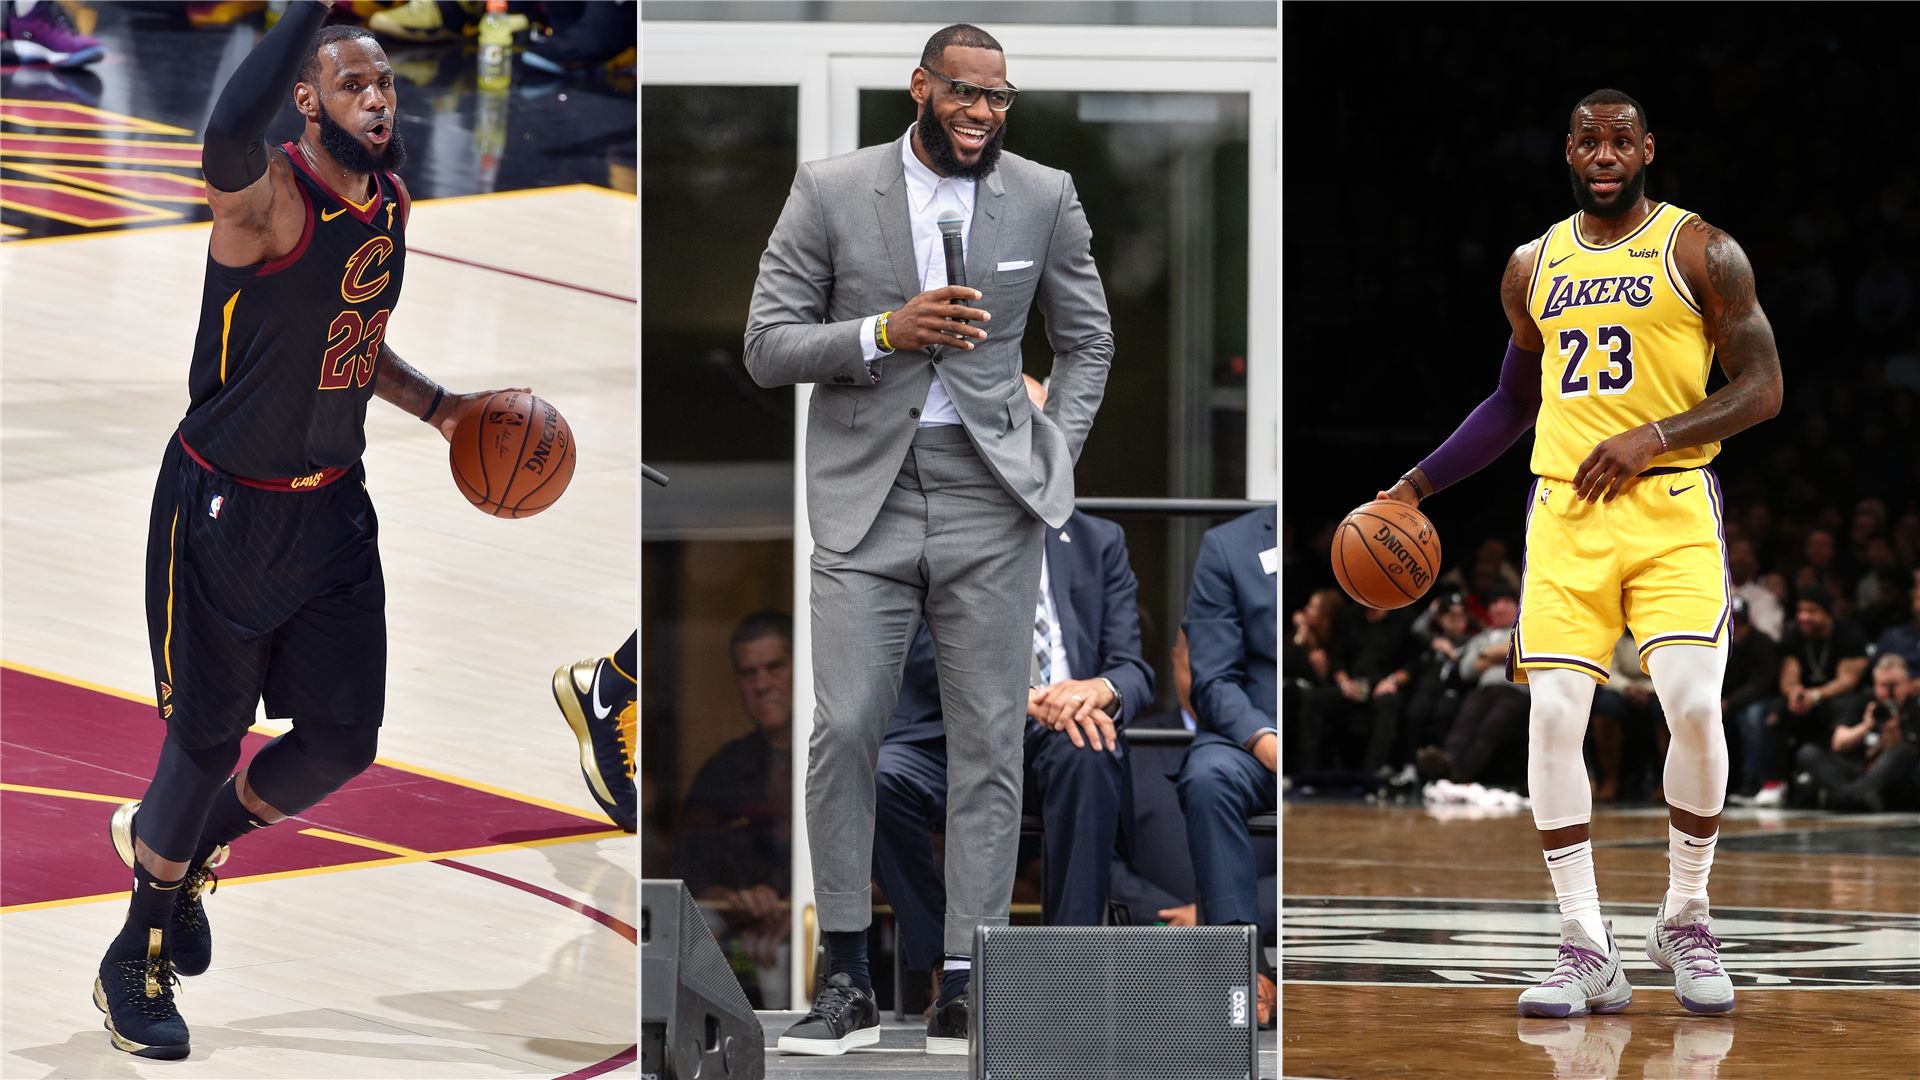 LeBron James named AP Male Athlete of the Year | NBA.com Canada | The official site of ...1920 x 1080